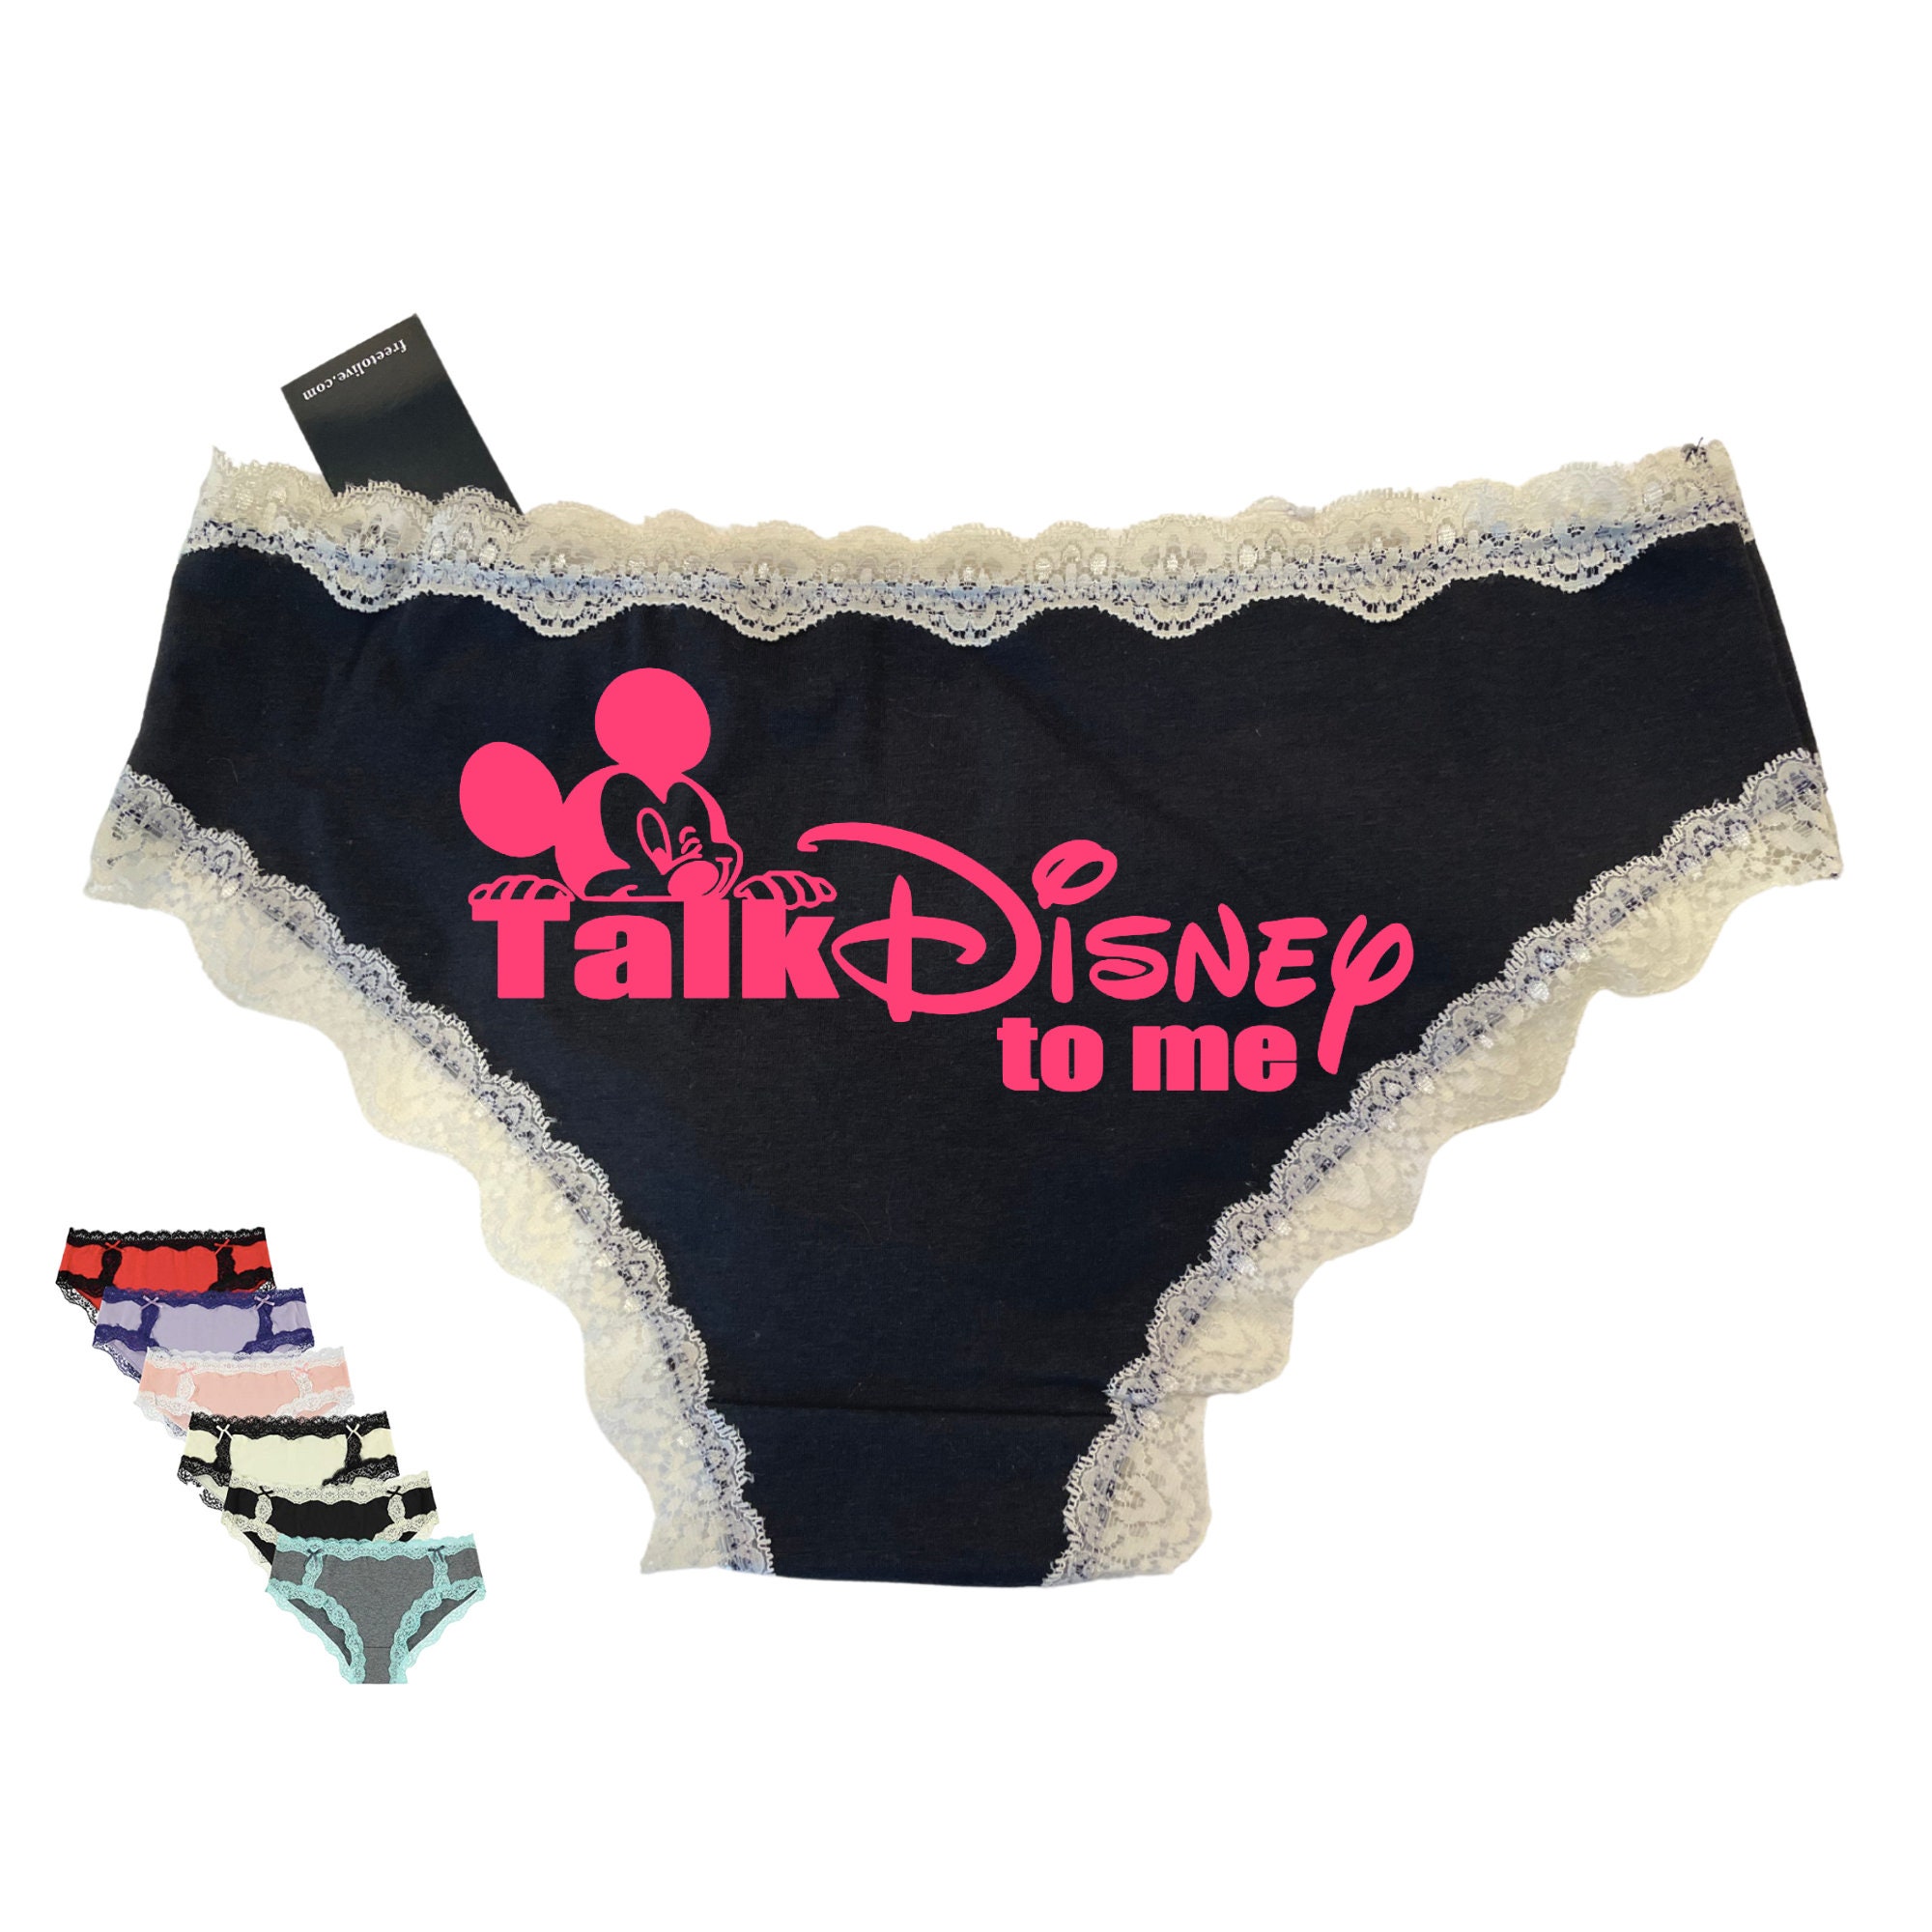 Mickey Mouse Panties -  Canada